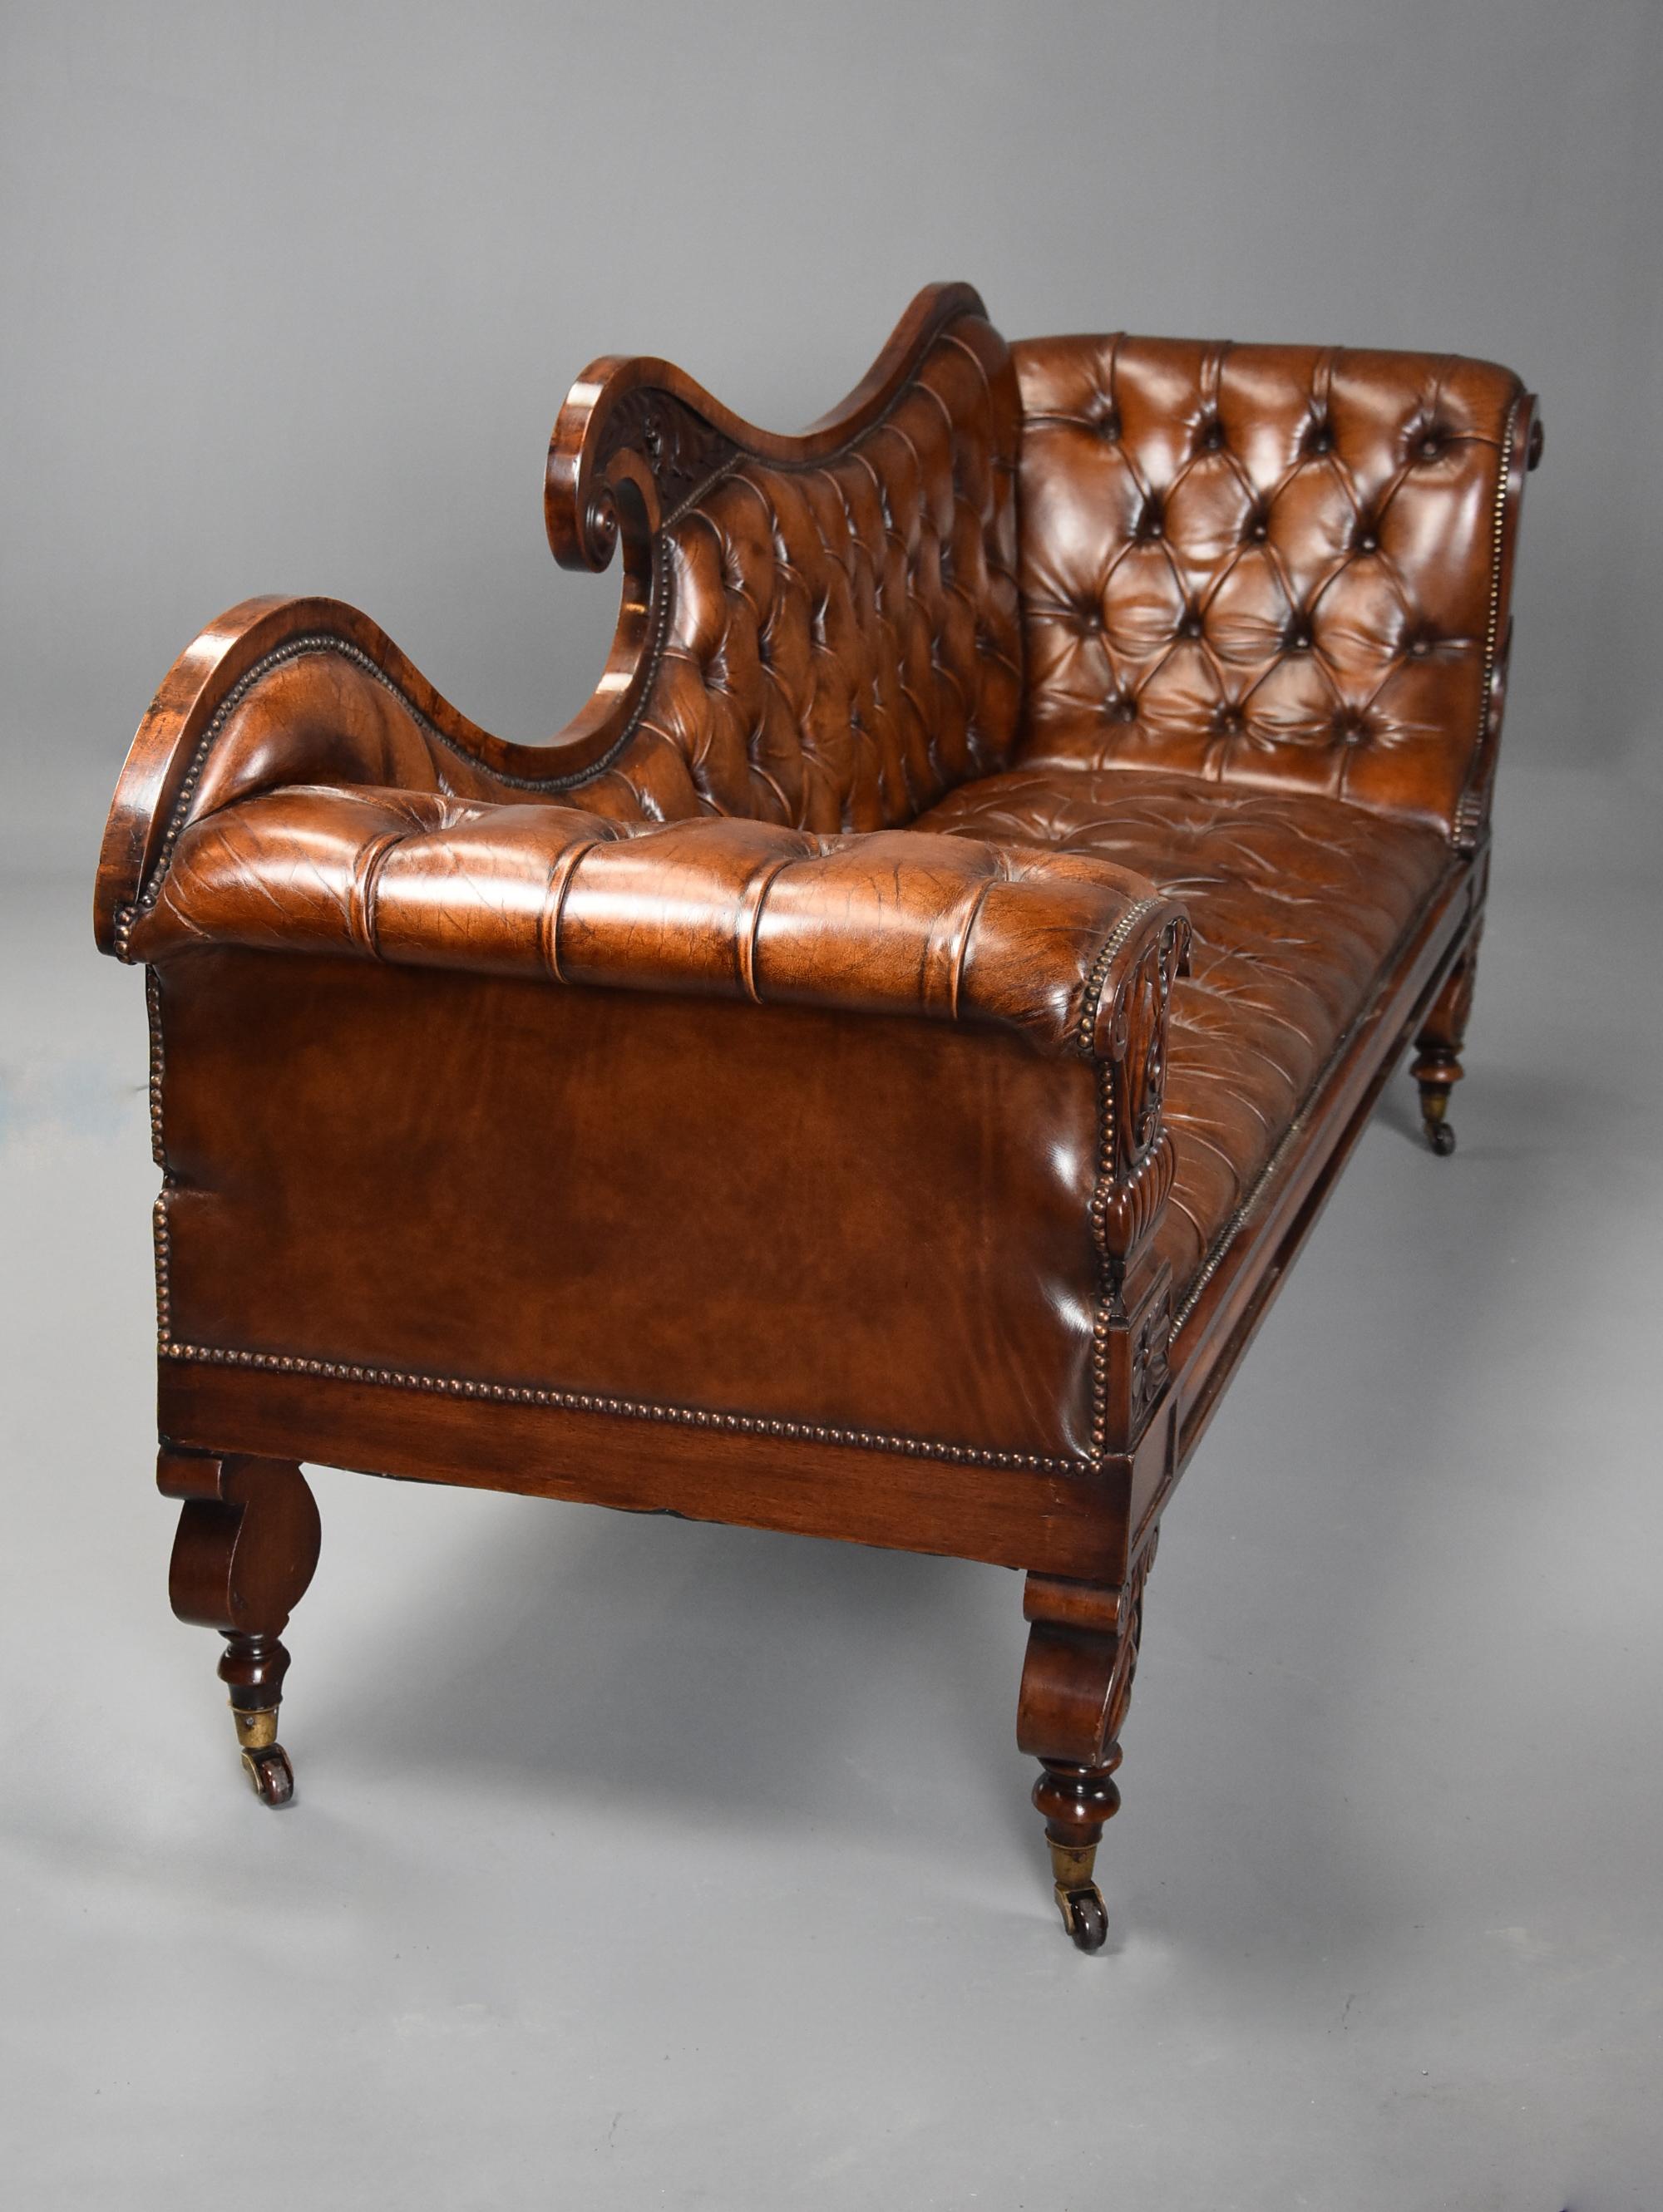 Superb Late Regency/William IV Mahogany Deep Buttoned Brown Leather Sofa For Sale 5